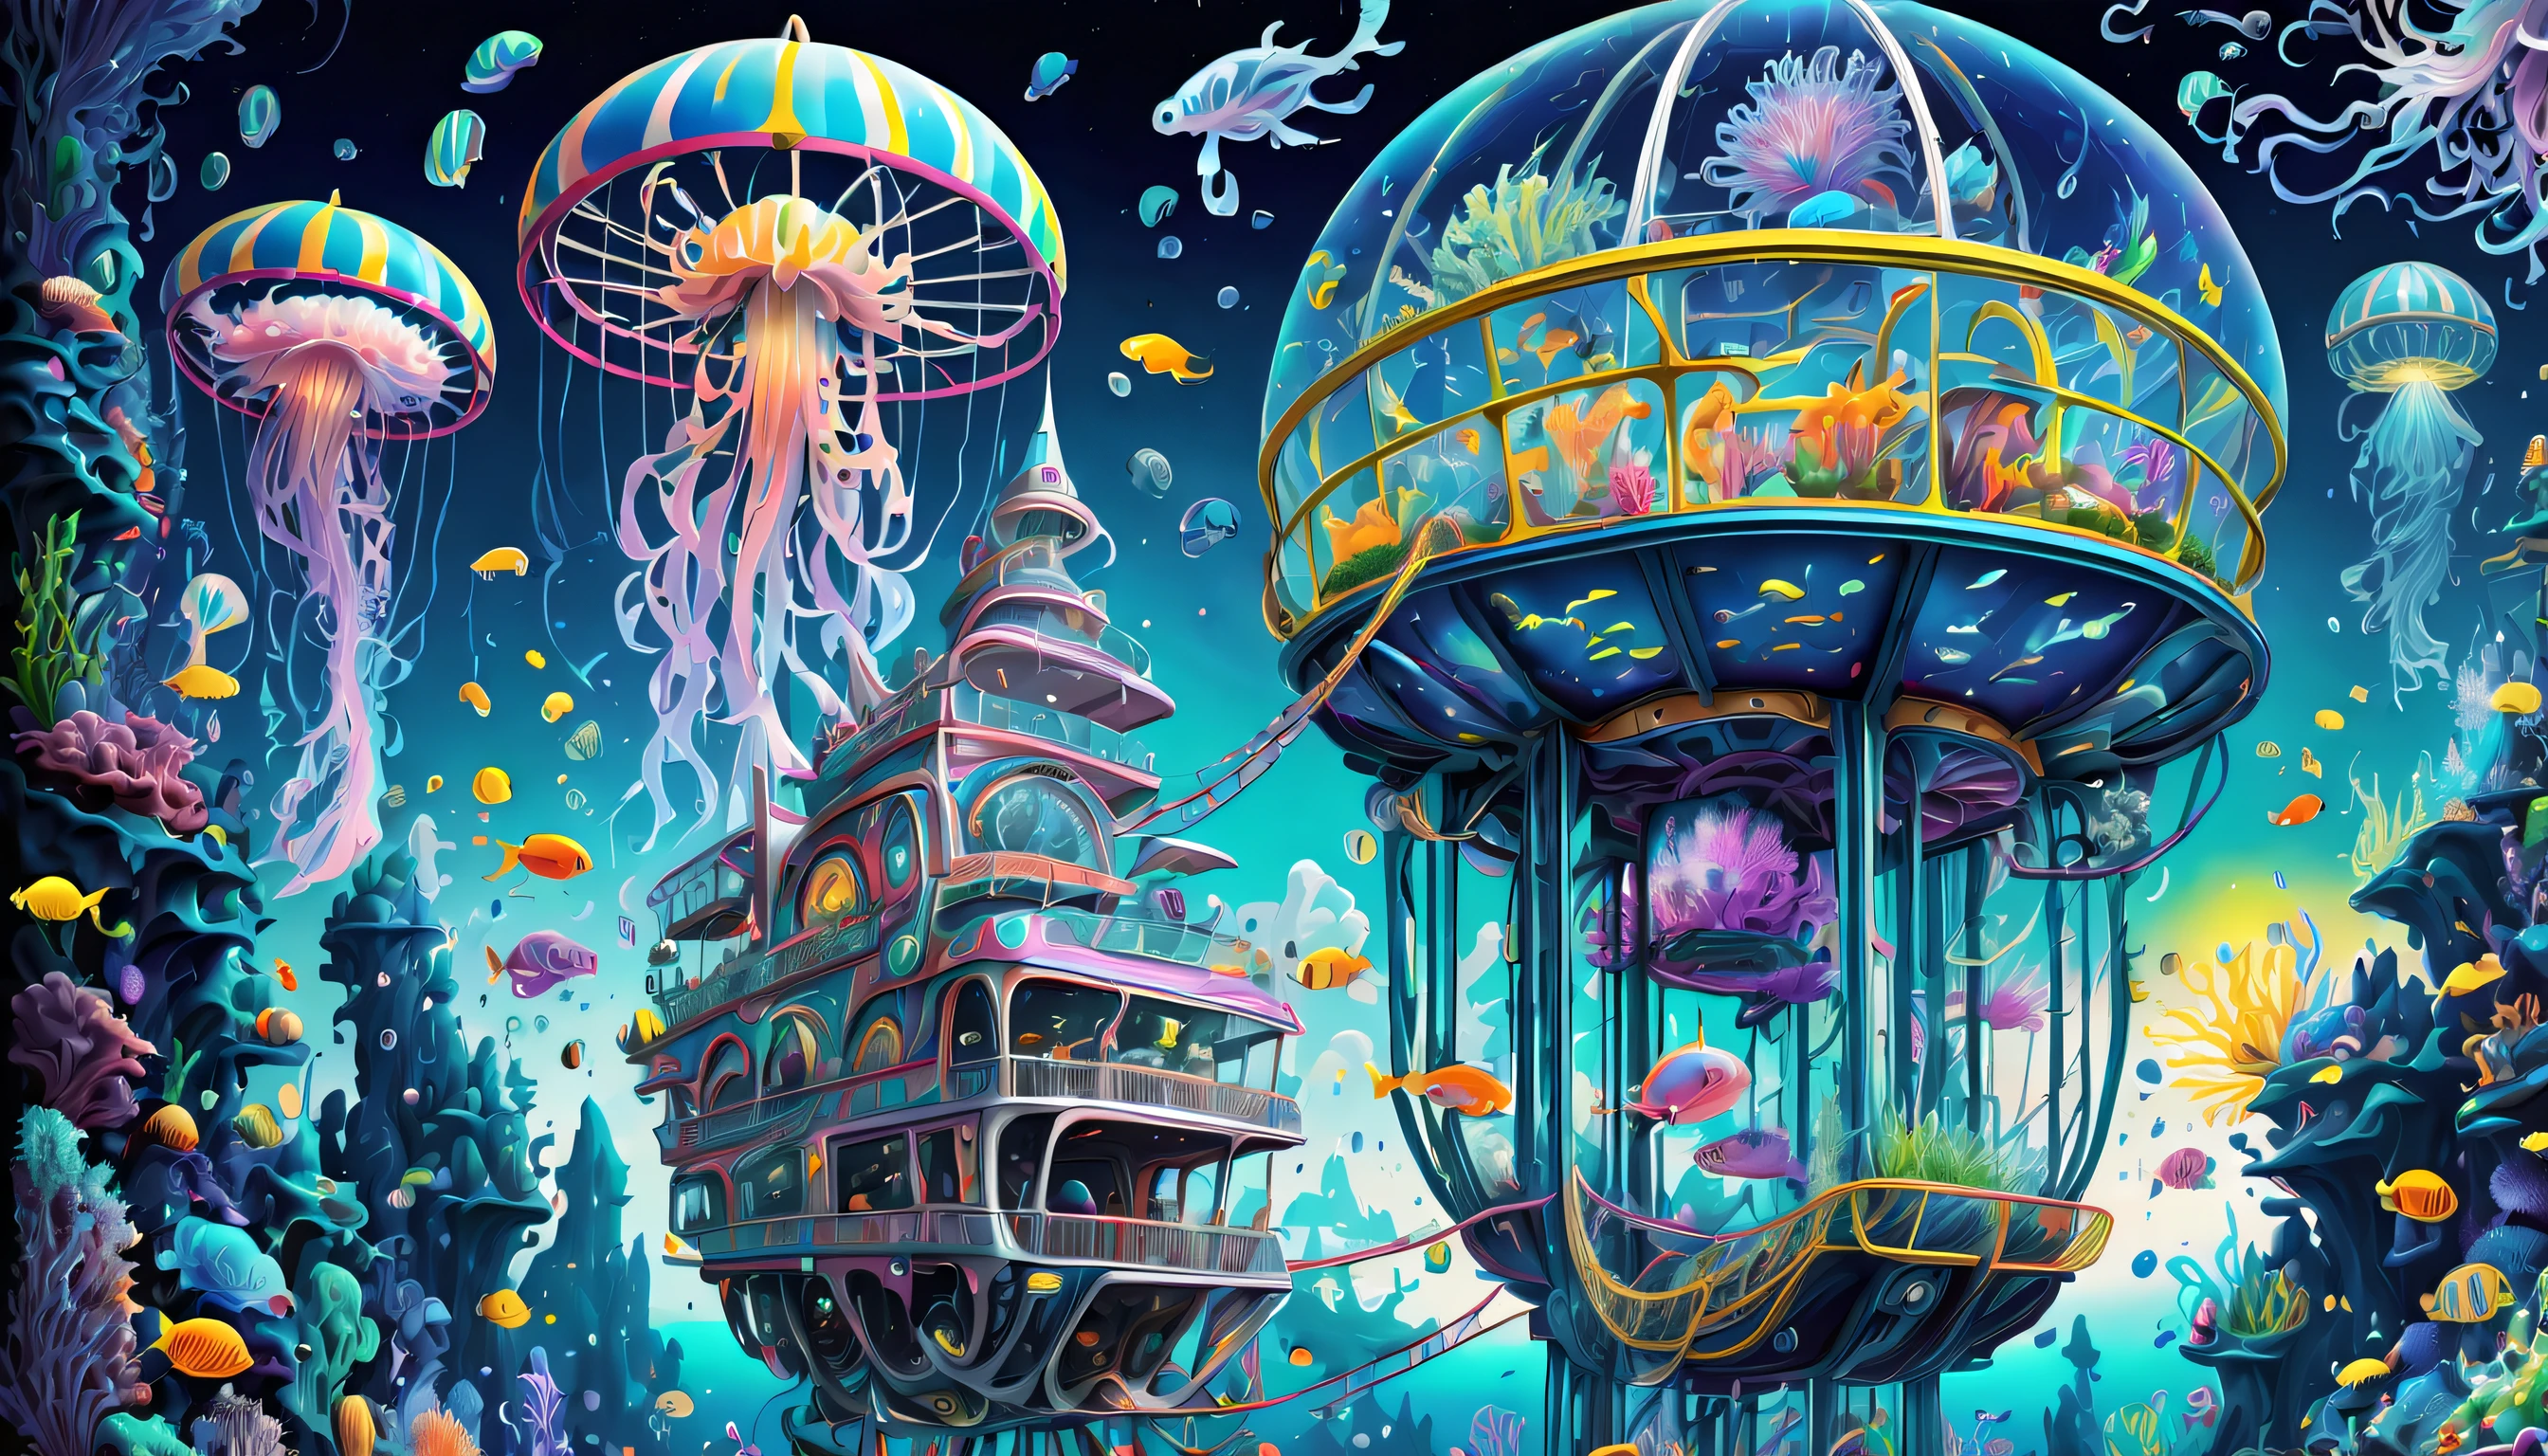 very detailed gouache painting, (((deep sea futuristic_theme_A park integrated with an aquarium with extremely detailed gouache illustrations:1.4))), (((futuristic intricate details_underwater futuristic_SF_roller_coaster and ferris wheel_Wheel:1.4))), (((See breathtaking pop spectacles_color jellyfish street_light:1.3))), Its fantastic brilliance is captured in amazing detail.、Brought to life with unparalleled skill and craftsmanship。. Intricate details and textures in silver and gold metallics, Adorable expression, (((A true masterpiece of the highest quality:1.4))), Cool and cute, enjoy sculpture, Showcasing the artist&#39;s skillful brushwork. The artist&#39;s skillful brushwork was demonstrated, Intricate details, complex brush strokes, insane handwriting, Fine brushstrokes, (((High quality with high transparency:1.3))), (((highest quality render:1.3))), (((Everything comes into sharp focus:1.3))), Images that exude an otherworldly aura, (((Great addition digital painting:1.3))), (((Radiosity rendered in astonishing 32K resolution:1.4))), Highest Quality, hightquality, Highest Quality Masterpiece, Visually appealing and appealing images, Best possible quality, Everything in focus is sharp, extravagant wishes, The contour lines created give off an amazingly beautiful shine., breathtakingly complex and elaborate, Imagine a visually striking illustration, (((Intricate details effortlessly blend fantasy and reality:1.5))),